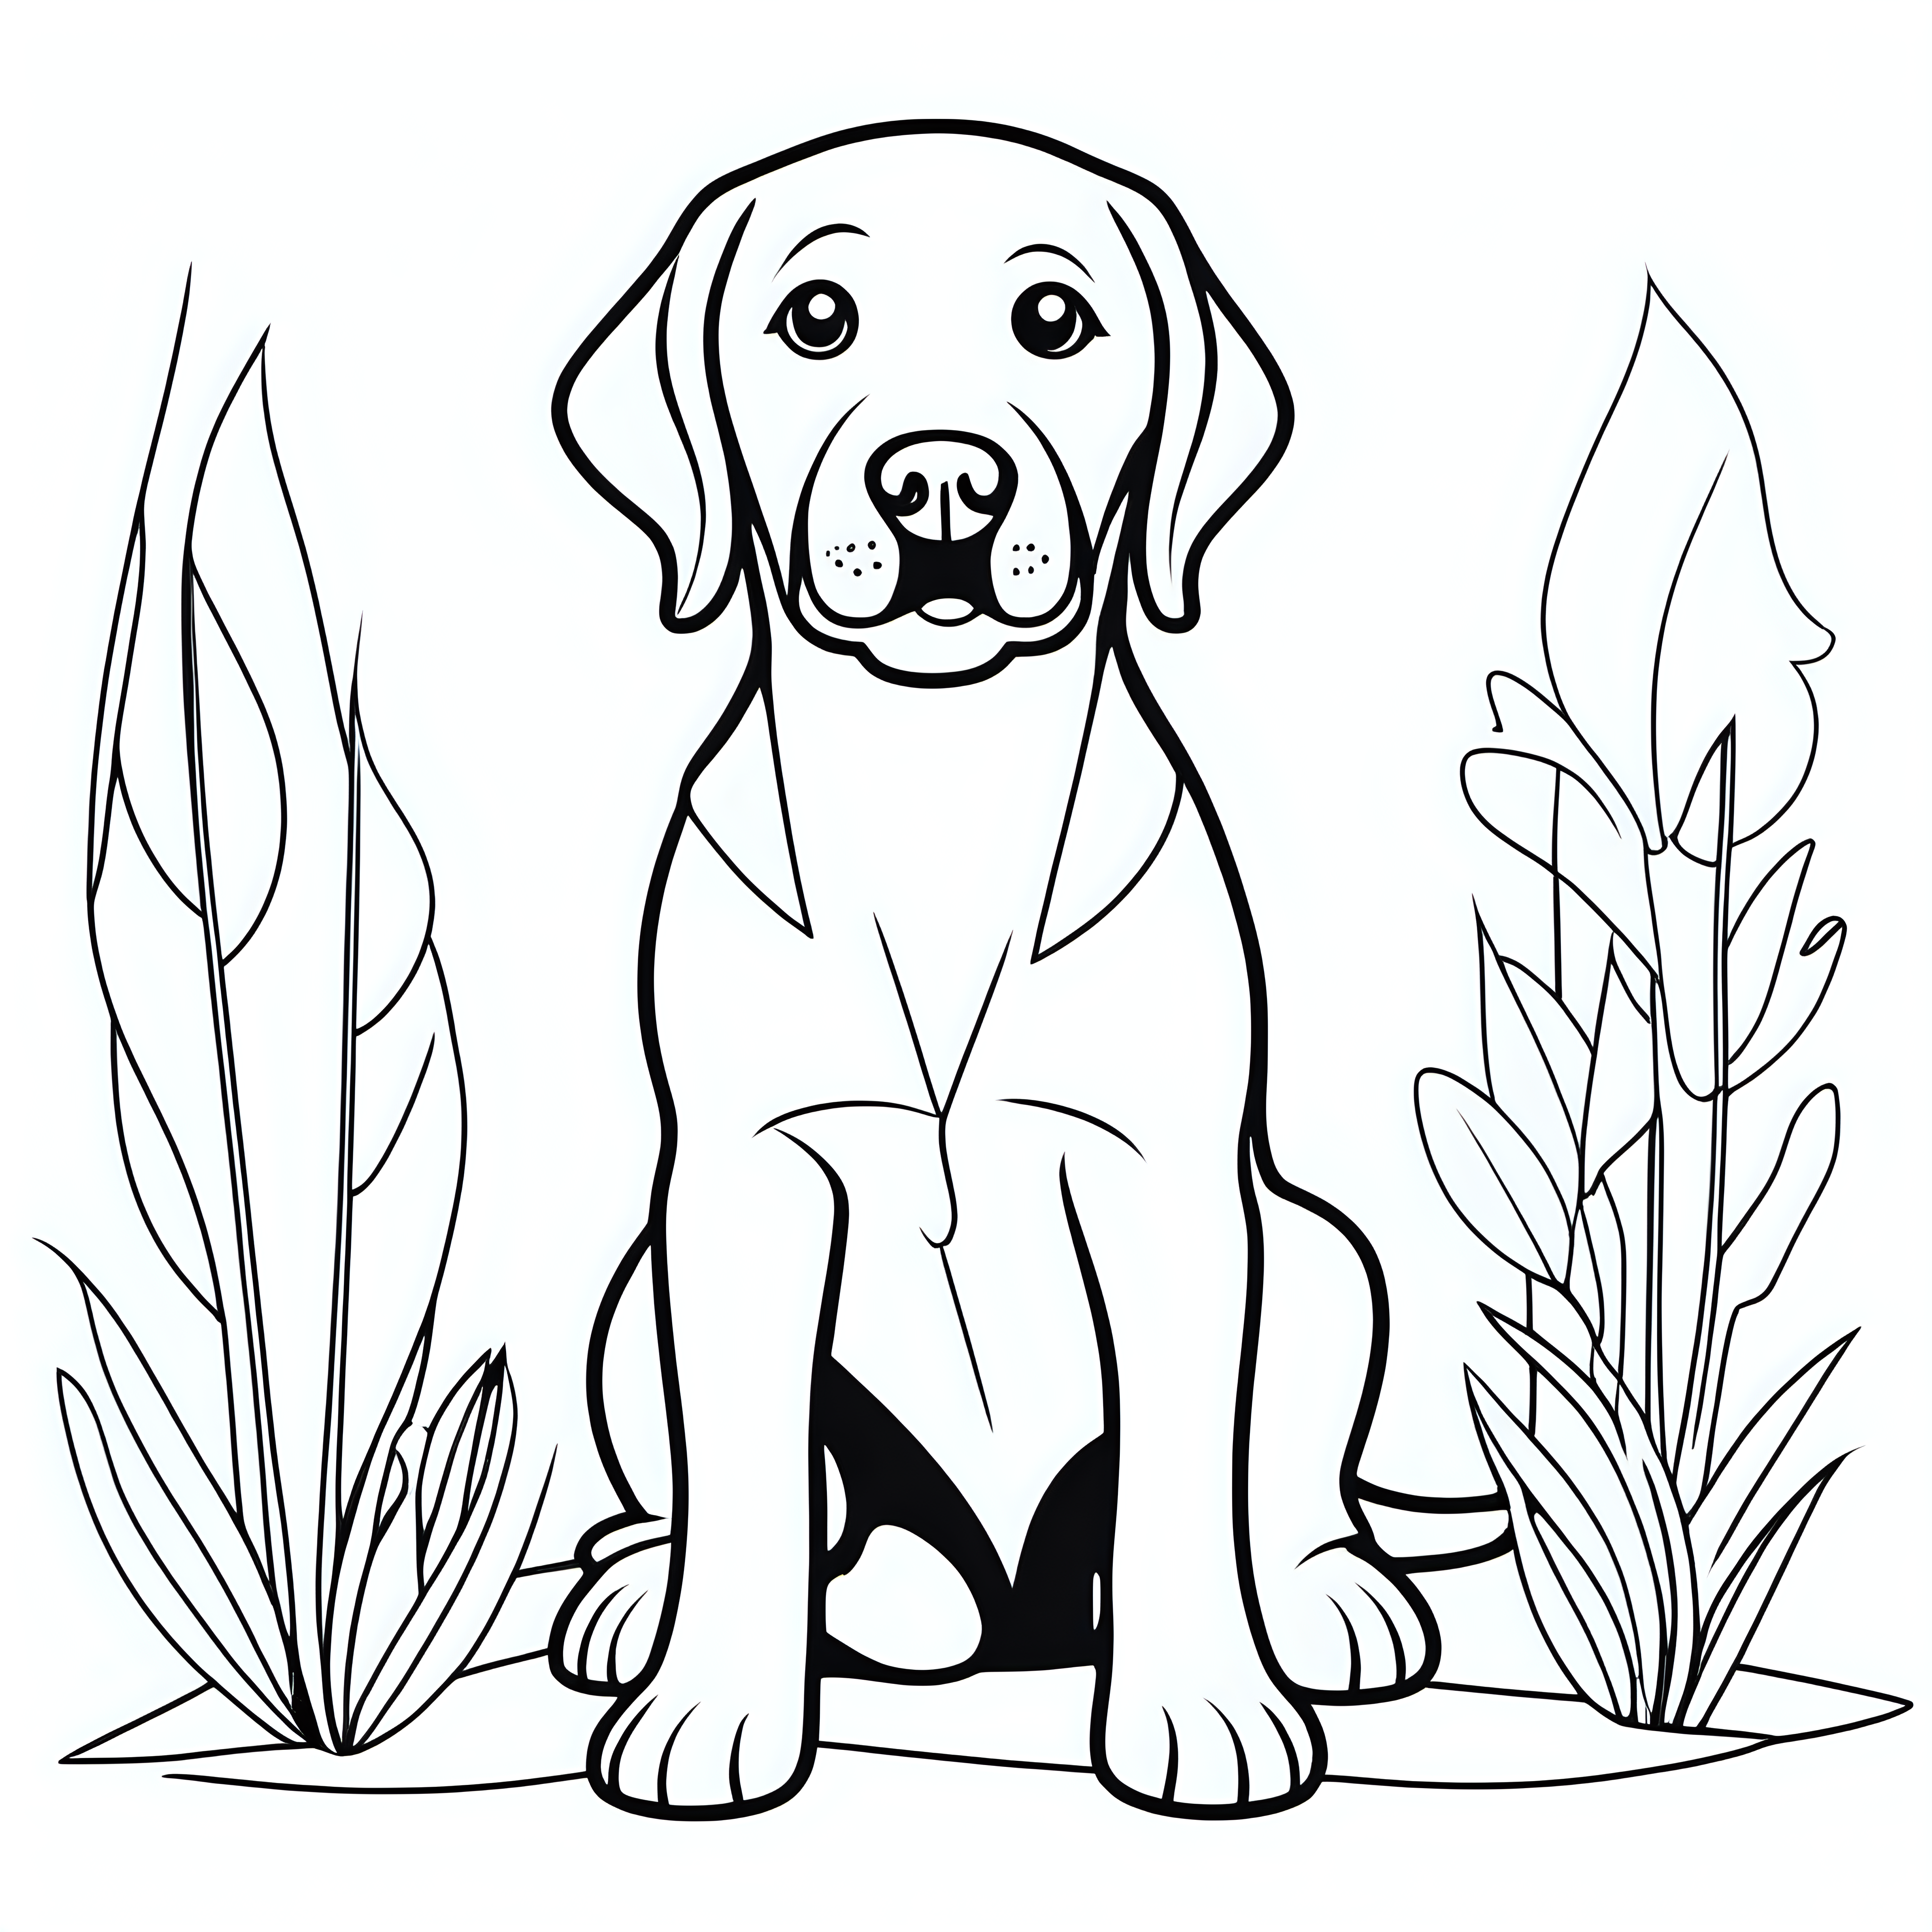 draw a cute labrador dog animal with only